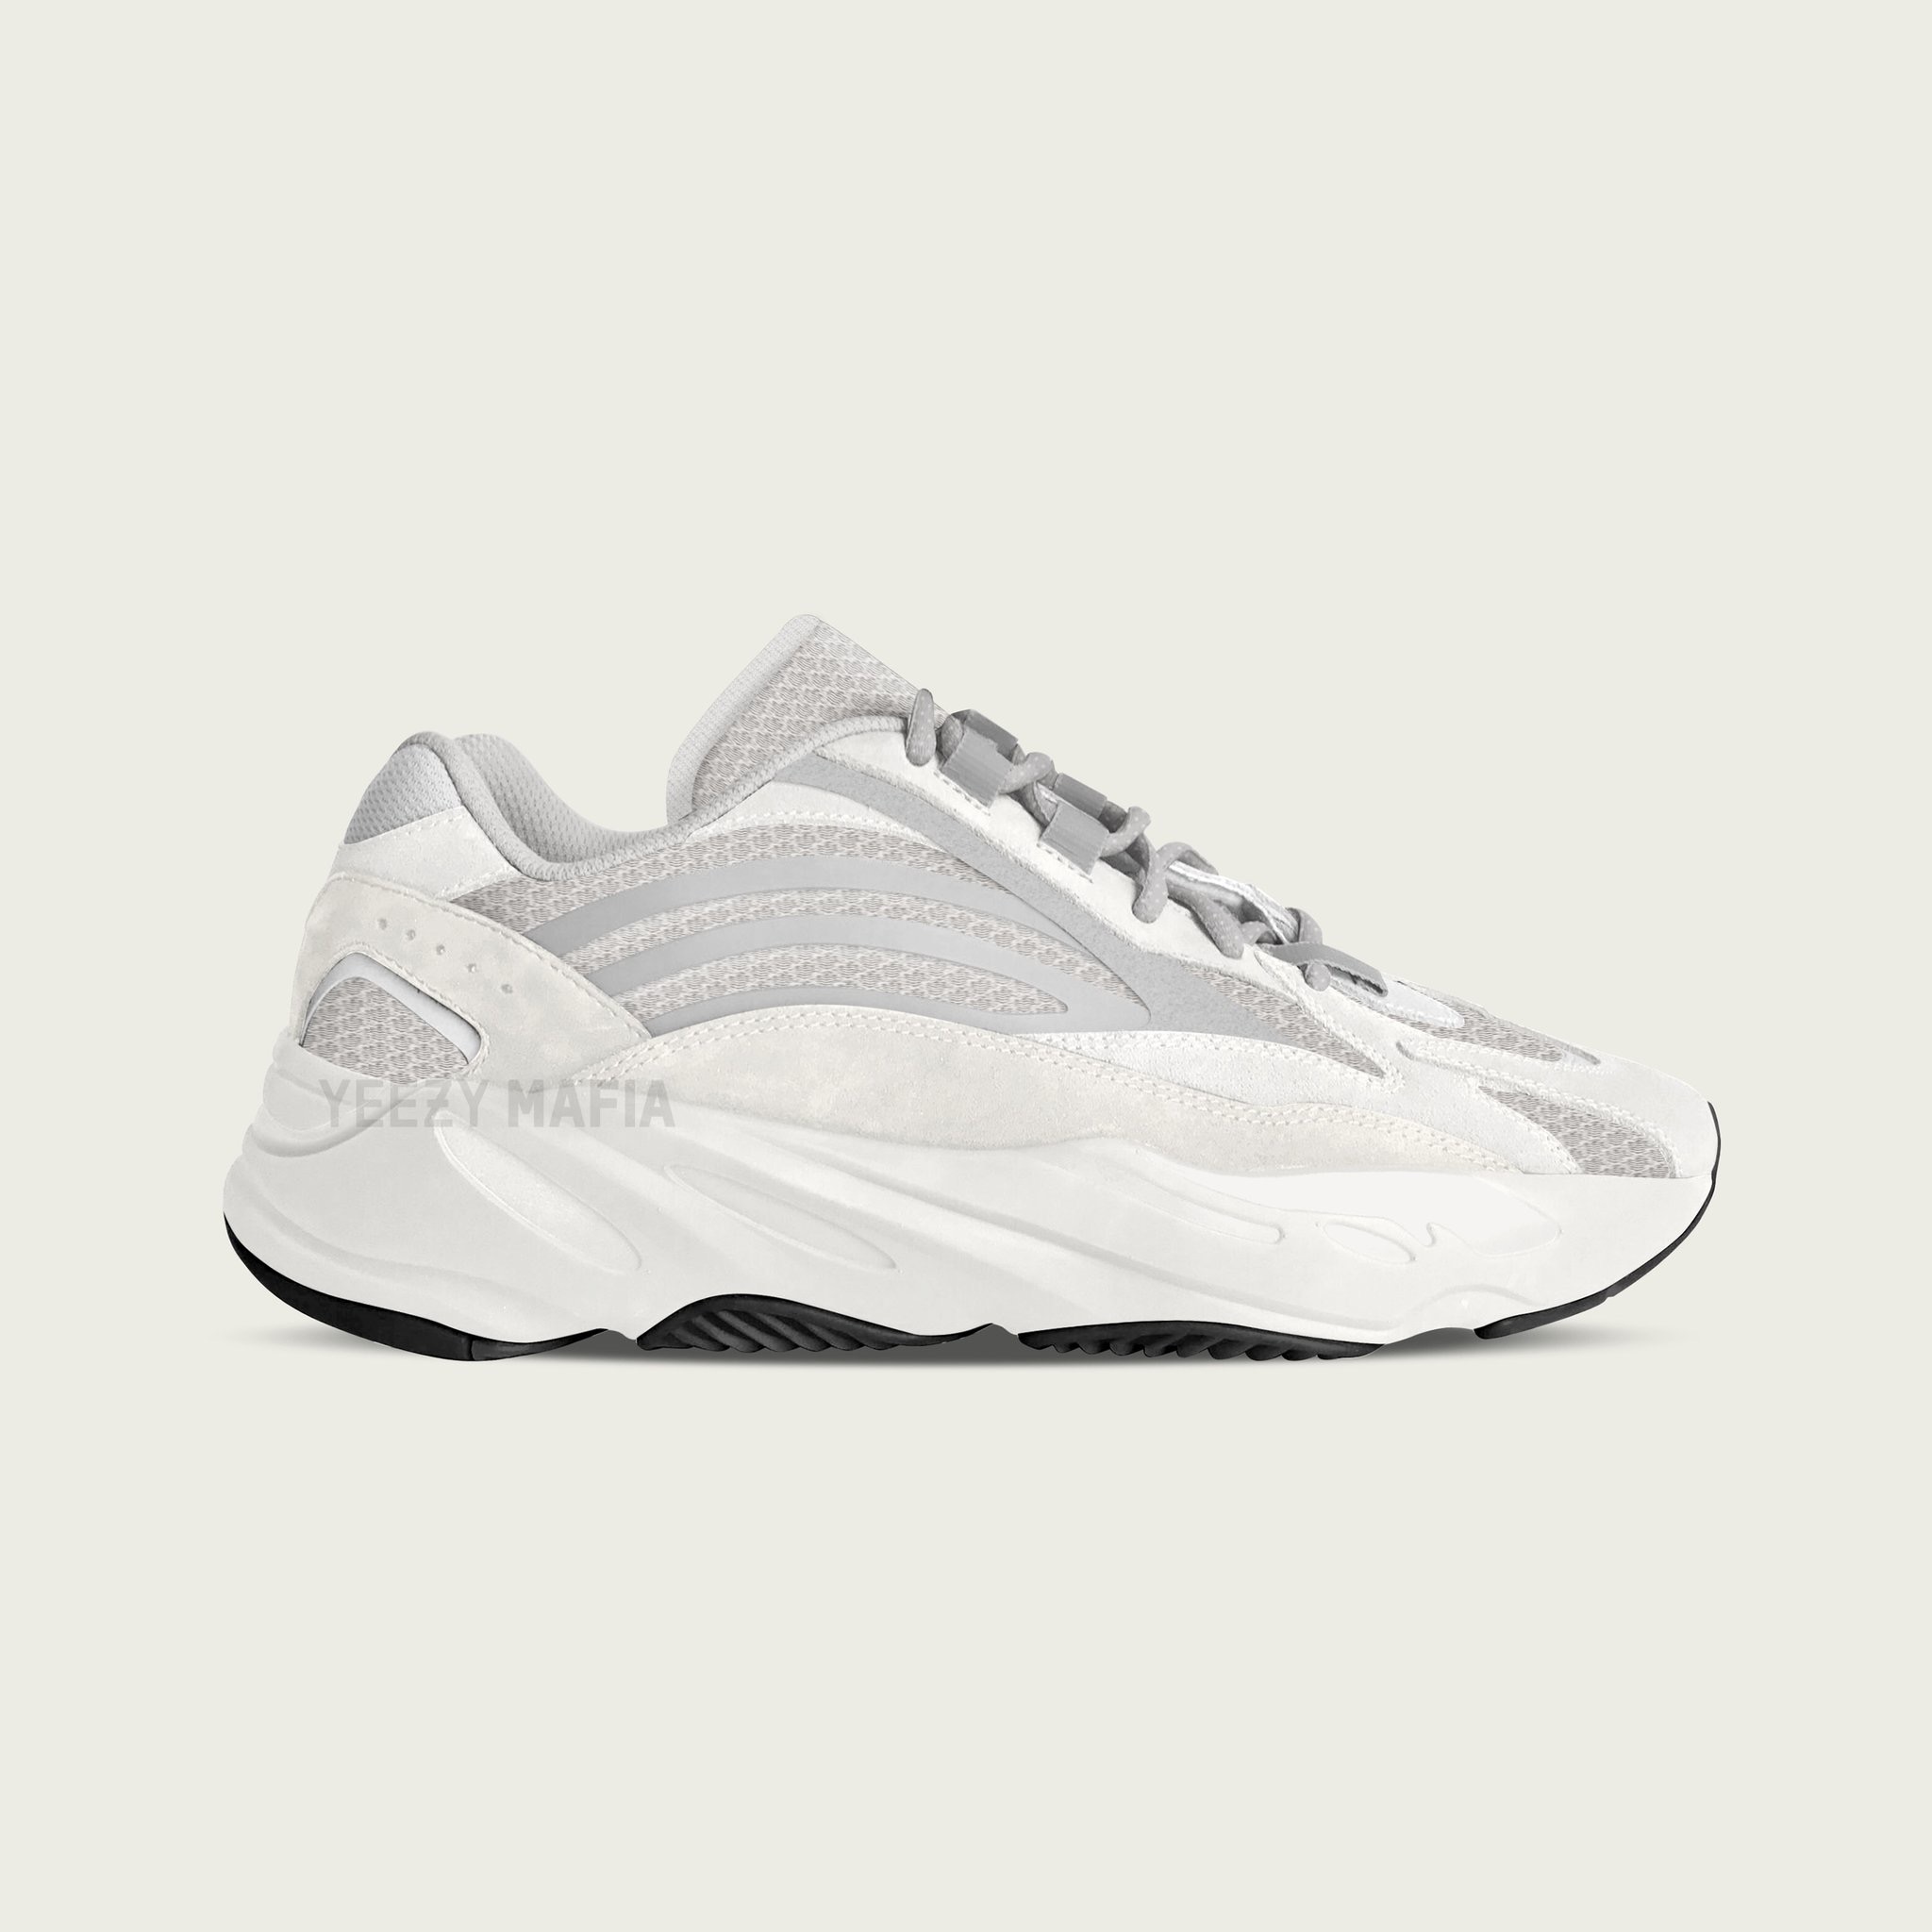 adidas】新型YEEZY BOOST 700 V2 “STATIC”が12月29日（土）に発売予定 | UP TO DATE